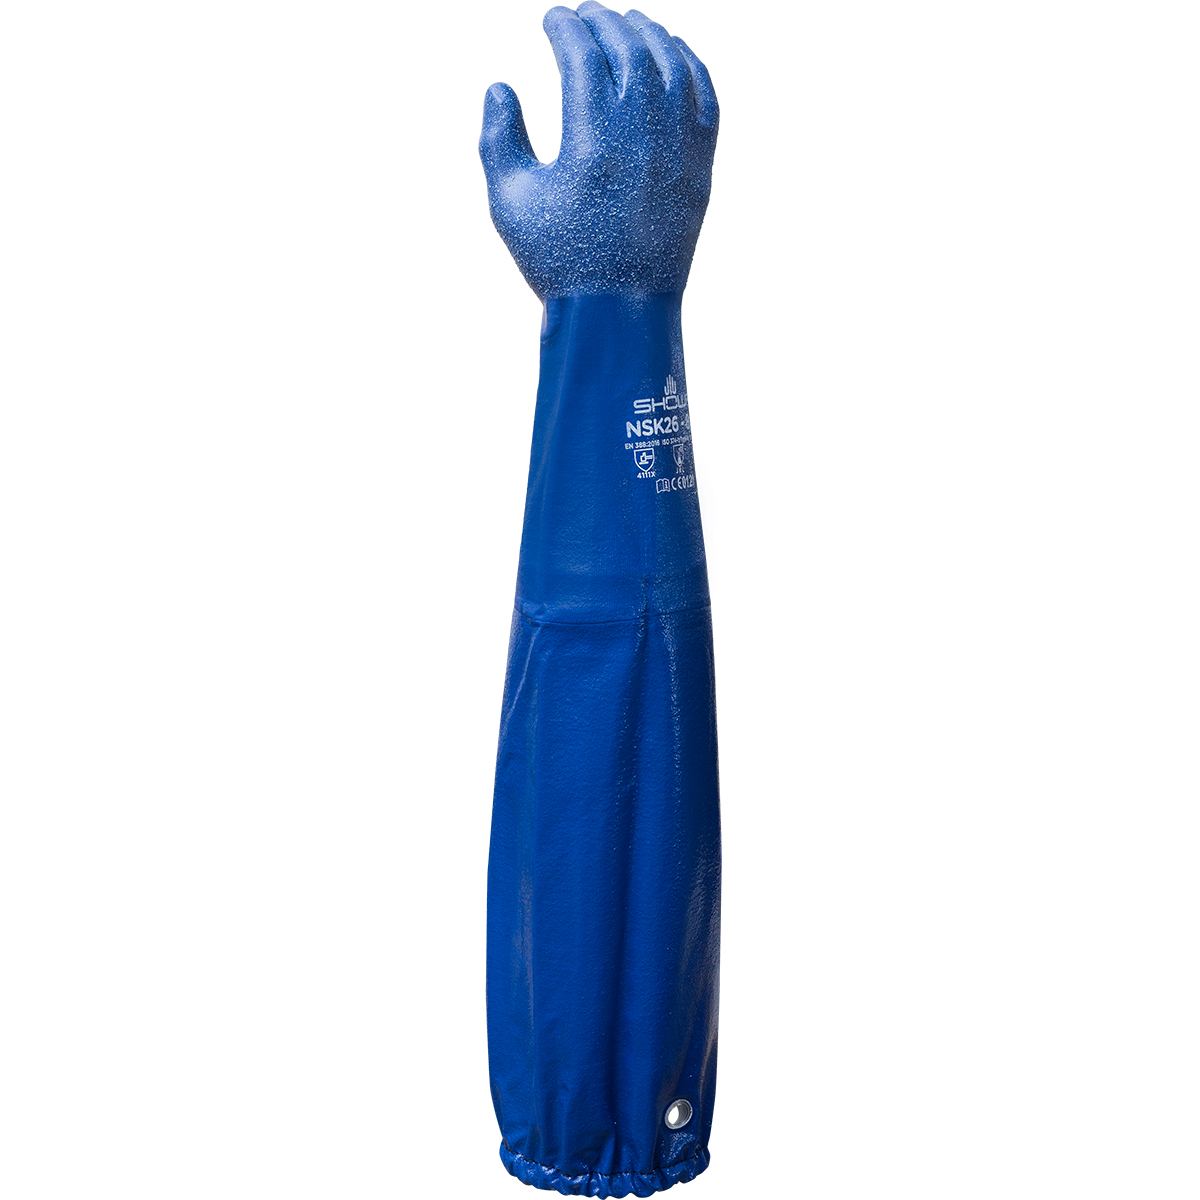 Chemical resistant nitrile, fully coated 26" extended gauntlet, royal blue, rough finish, cotton interlock liner, small